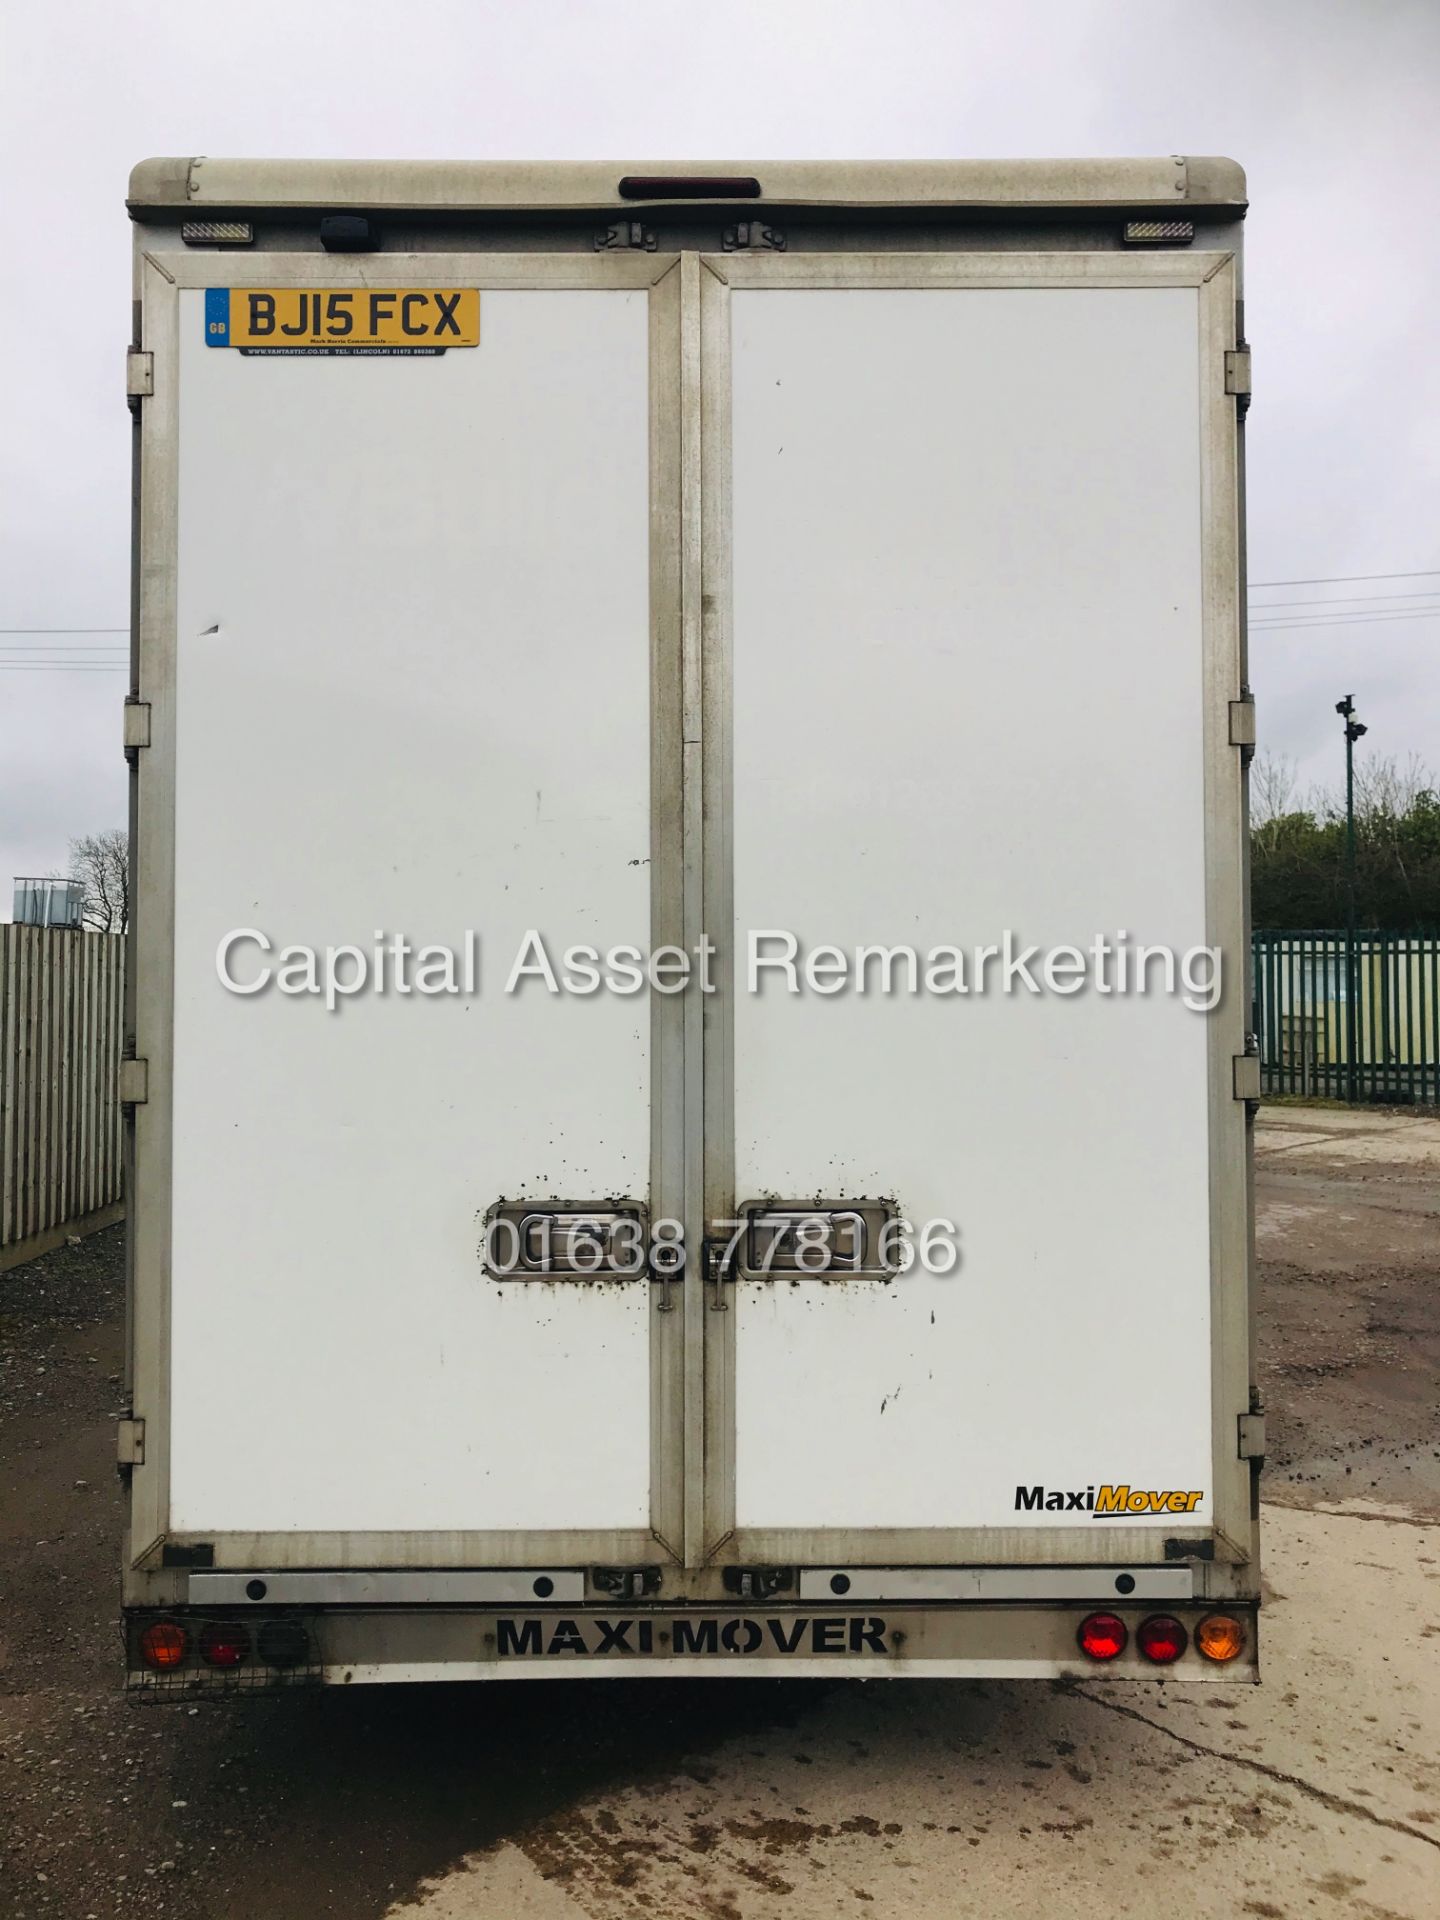 On Sale PEUGEOT BOXER 2.2HDI (130) LONG WHEEL BASE LUTON LOW LOADER" MAXI MOVER - 15 REG - AIR CON - Image 9 of 20